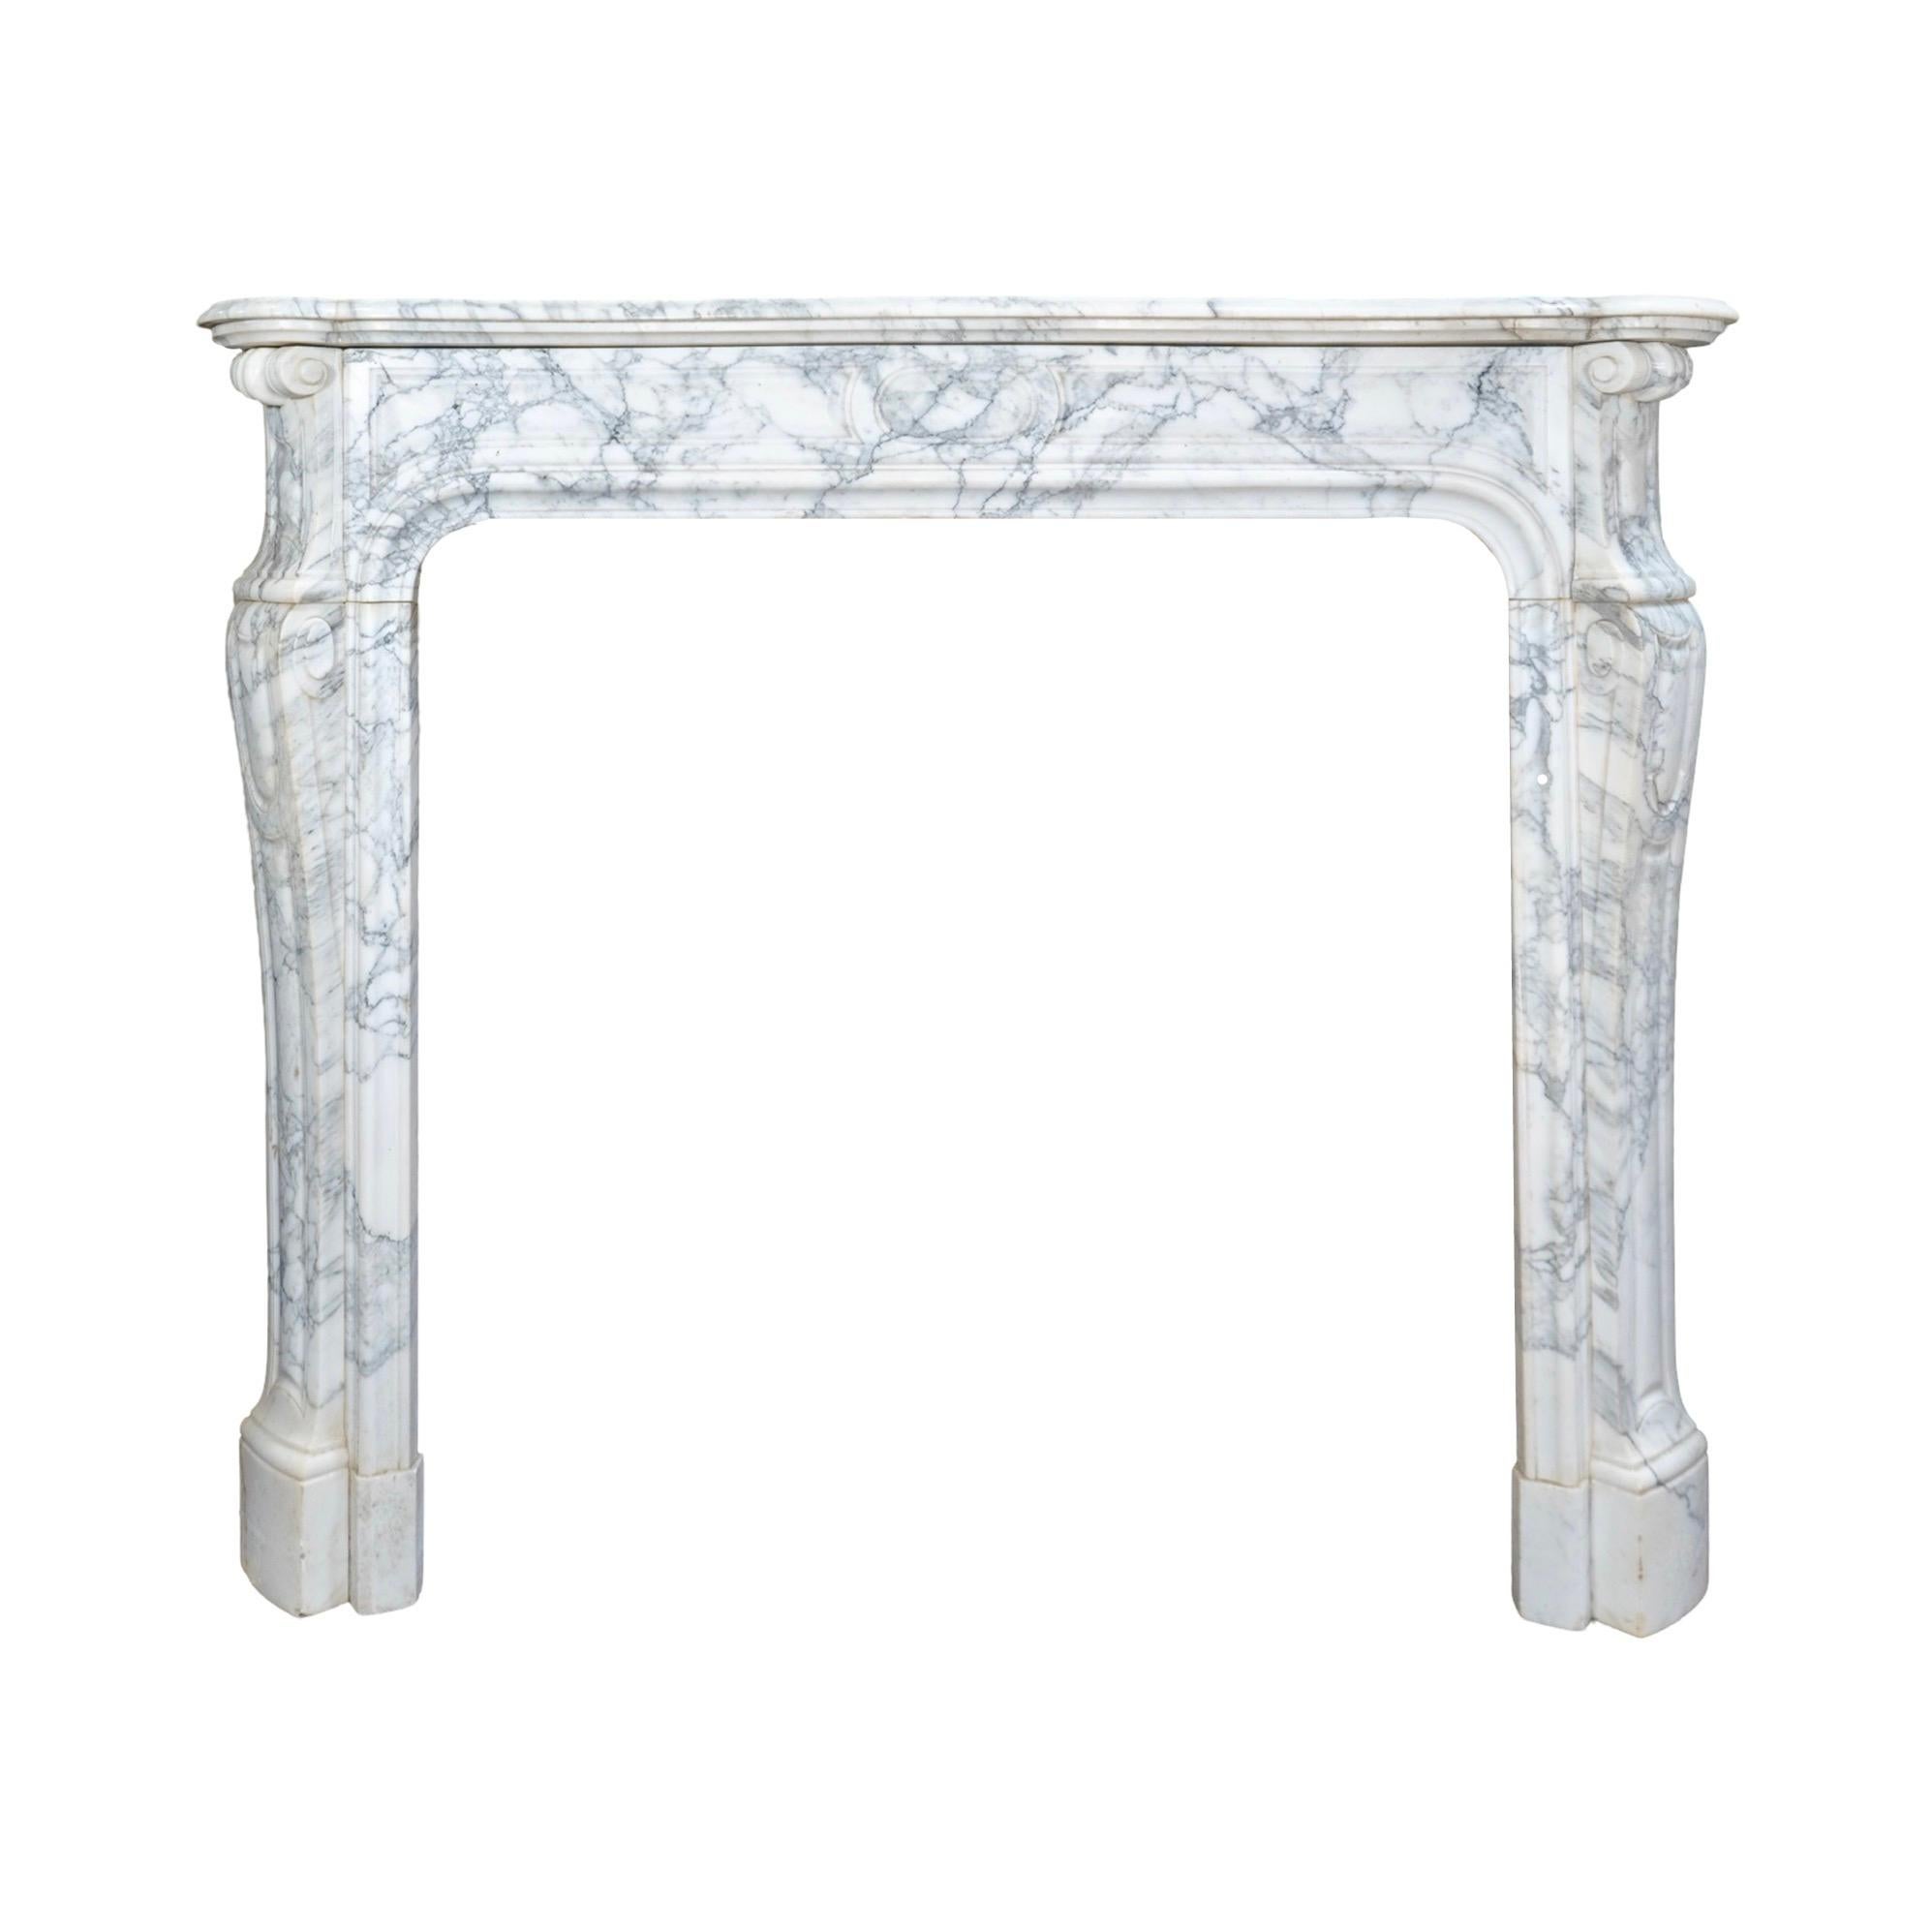 Crafted from exquisite French White Veined Carrara Marble, this 1890's Louis XVI style mantel boasts intricate carved details for a touch of elegance. Add a touch of luxury to your fireplace with this timeless piece, made from the finest marble from